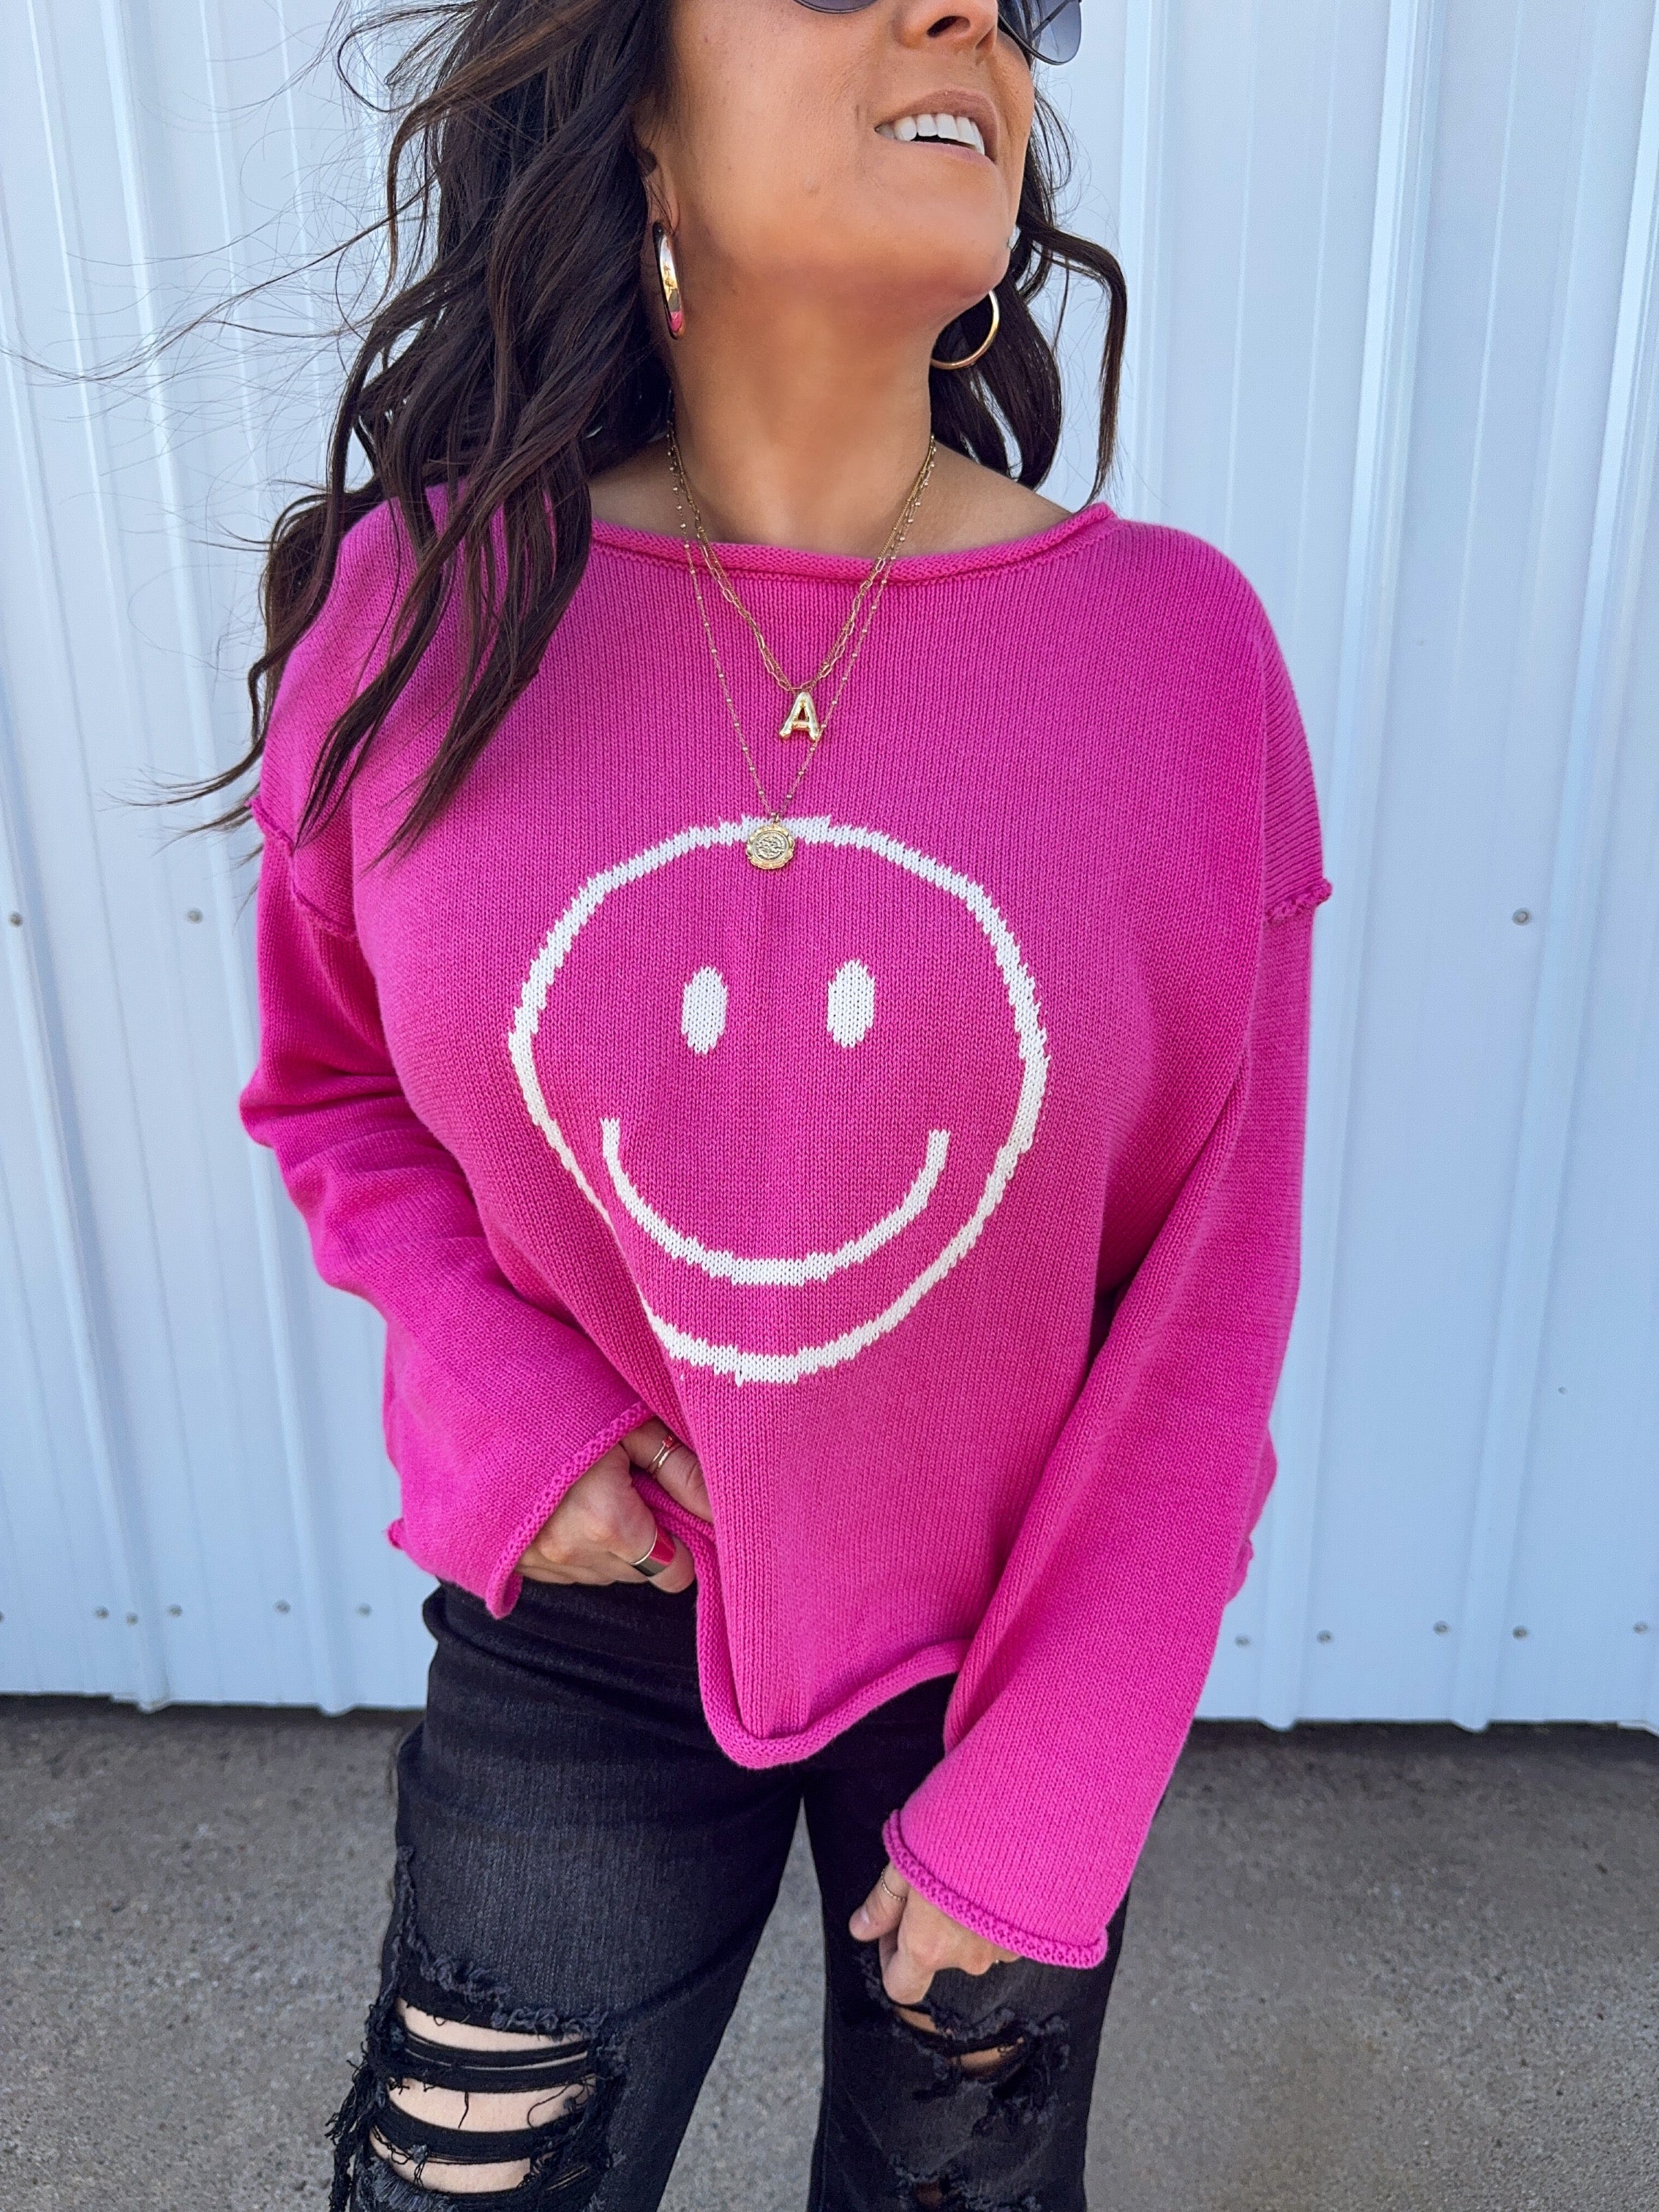 Where Were You Hot Pink Smiley Sweater